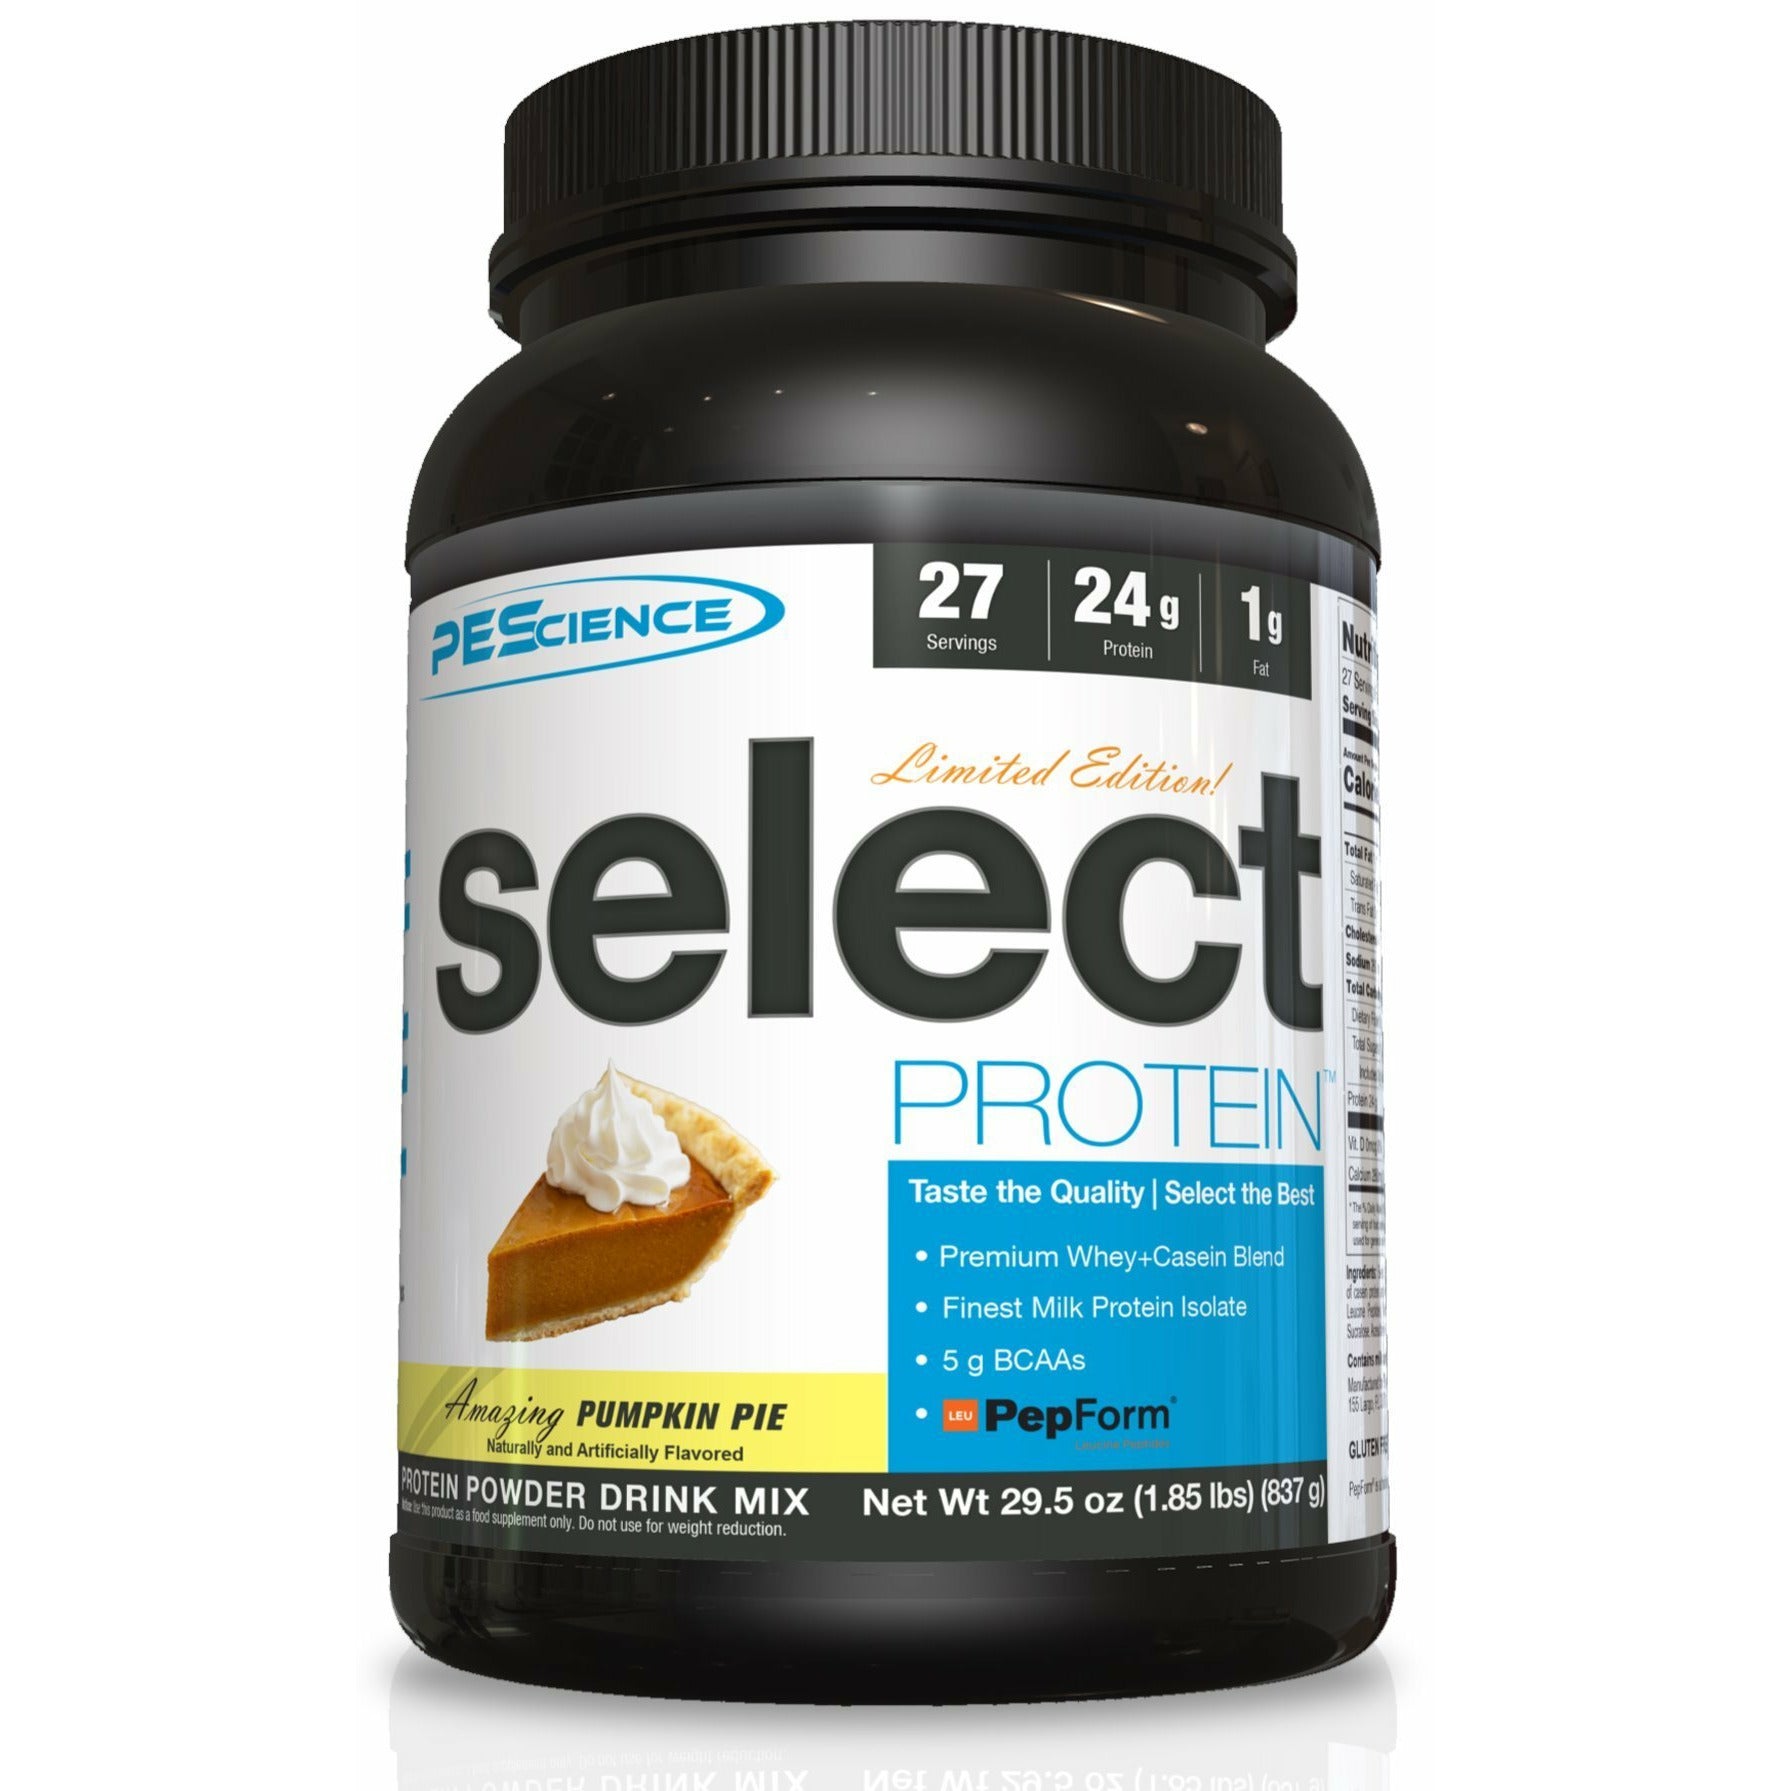 PEScience Select Protein (27 servings) Whey Protein Blend Pumpkin Pie - LIMITED EDITION PEScience